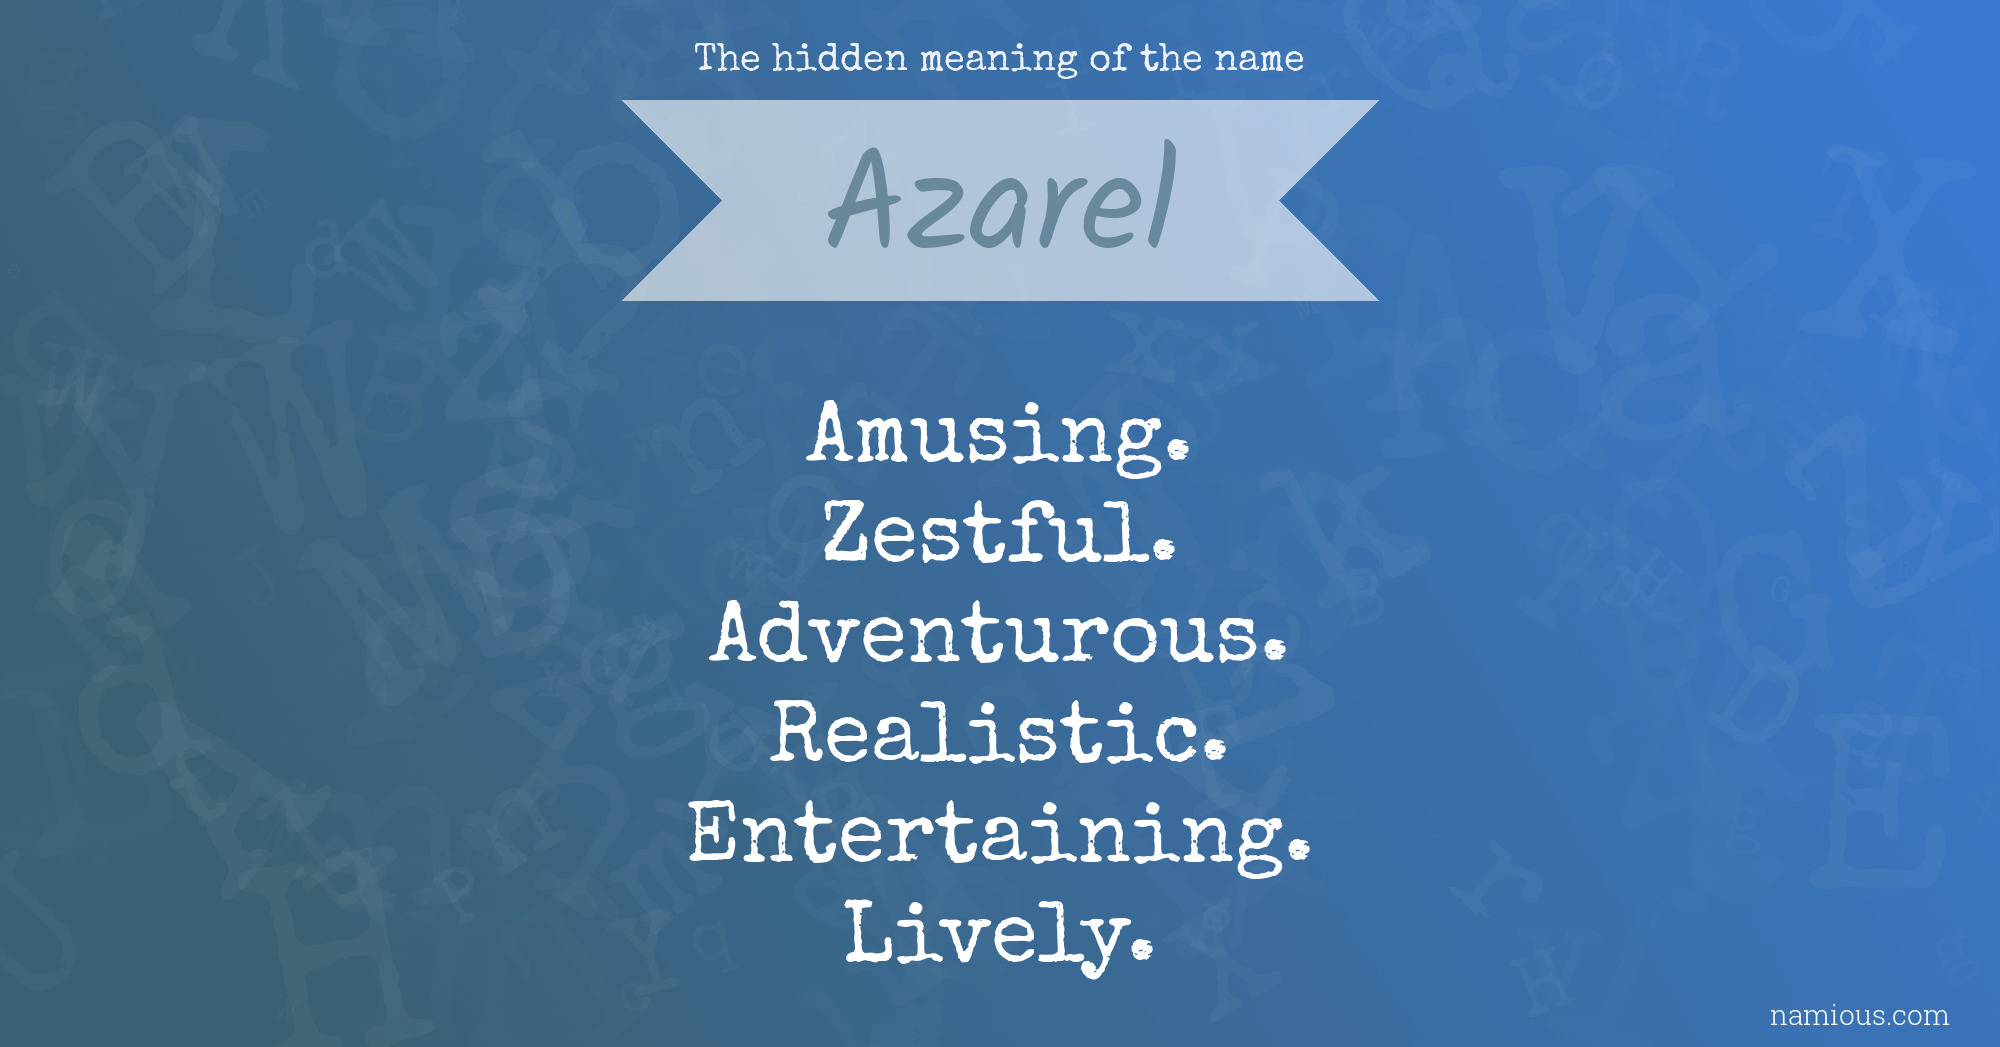 The hidden meaning of the name Azarel